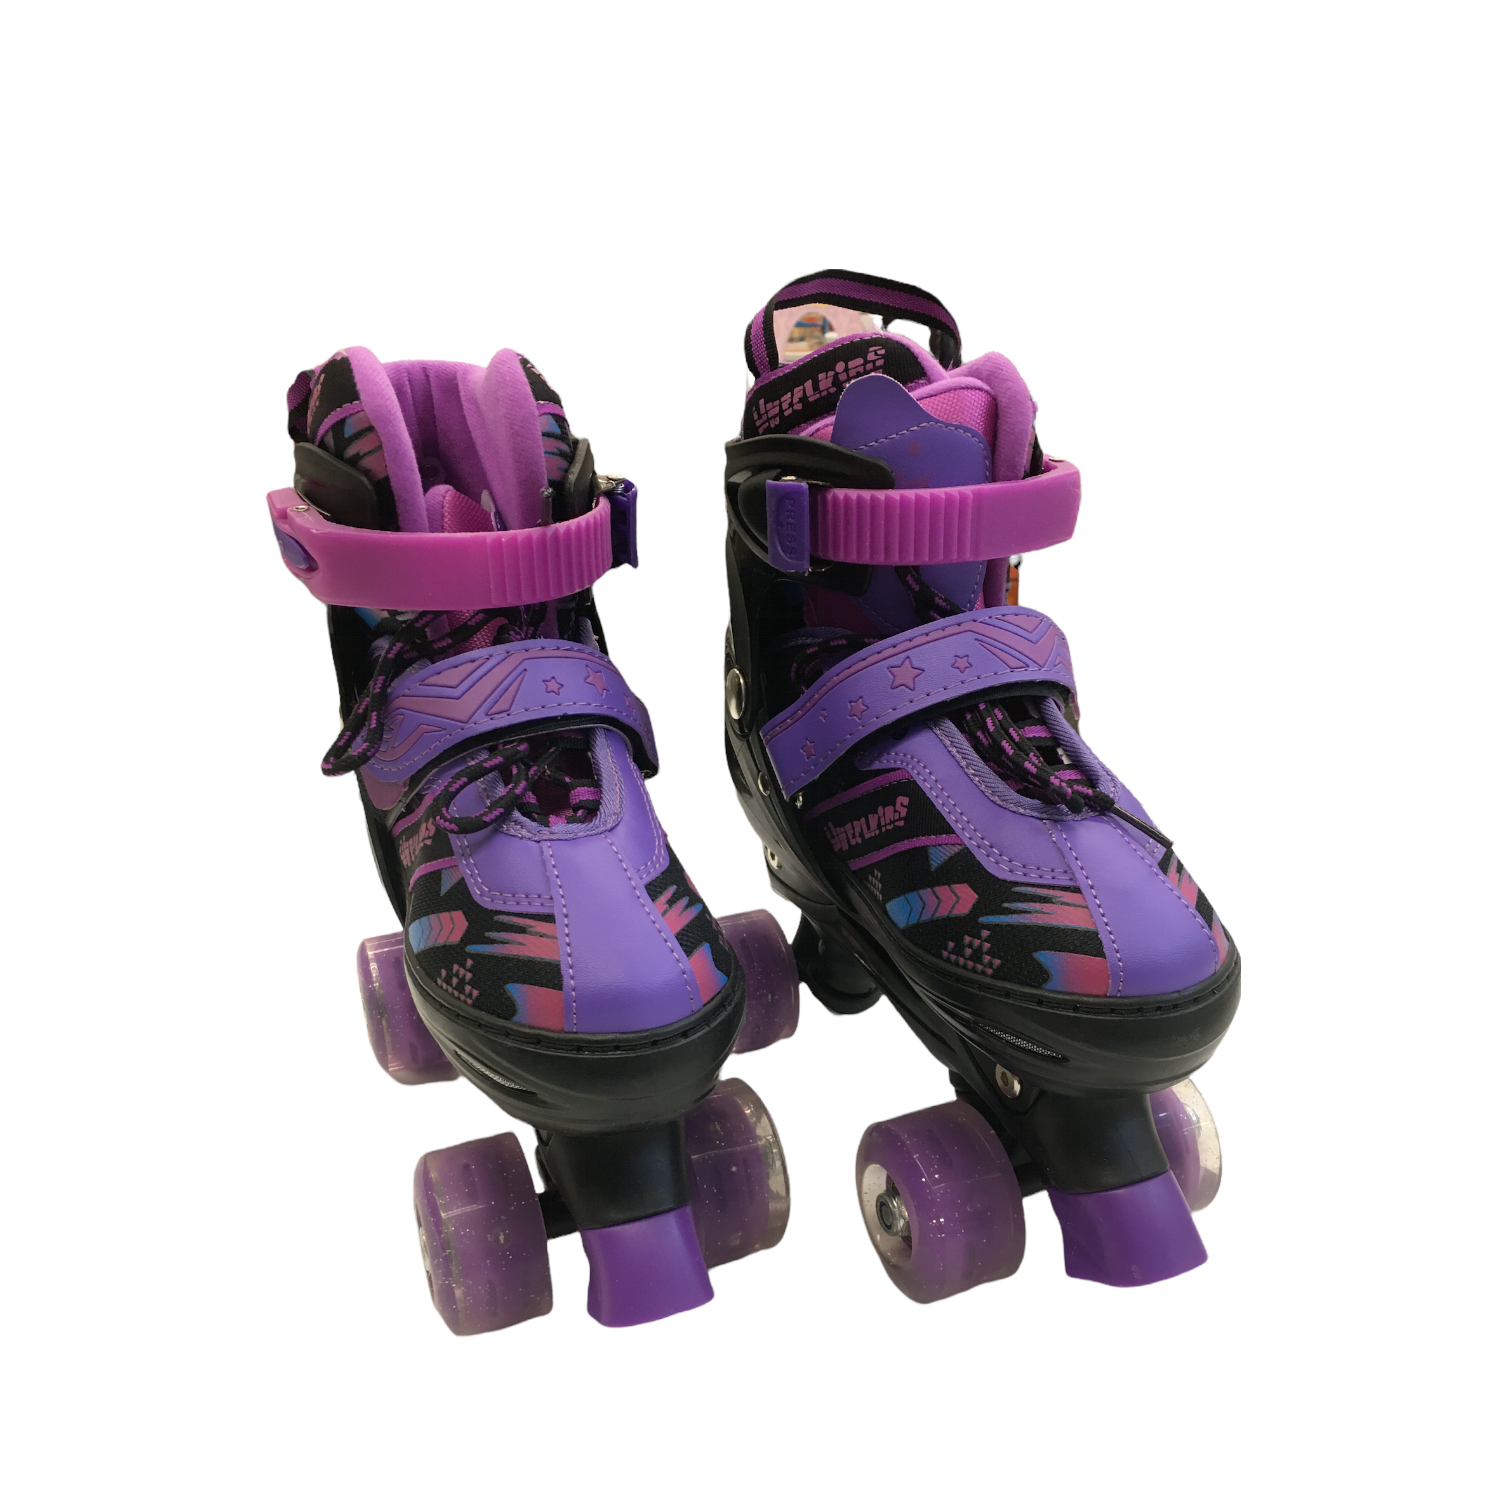 Skates (Adjustable), Girl, Size: 2/4y

#resalerocks #pipsqueakresale #vancouverwa #portland #reusereducerecycle #fashiononabudget #chooseused #consignment #savemoney #shoplocal #weship #keepusopen #shoplocalonline #resale #resaleboutique #mommyandme #minime #fashion #reseller                                                                                                                                      Cross posted, items are located at #PipsqueakResaleBoutique, payments accepted: cash, paypal & credit cards. Any flaws will be described in the comments. More pictures available with link above. Local pick up available at the #VancouverMall, tax will be added (not included in price), shipping available (not included in price, *Clothing, shoes, books & DVDs for $6.99; please contact regarding shipment of toys or other larger items), item can be placed on hold with communication, message with any questions. Join Pipsqueak Resale - Online to see all the new items! Follow us on IG @pipsqueakresale & Thanks for looking! Due to the nature of consignment, any known flaws will be described; ALL SHIPPED SALES ARE FINAL. All items are currently located inside Pipsqueak Resale Boutique as a store front items purchased on location before items are prepared for shipment will be refunded.